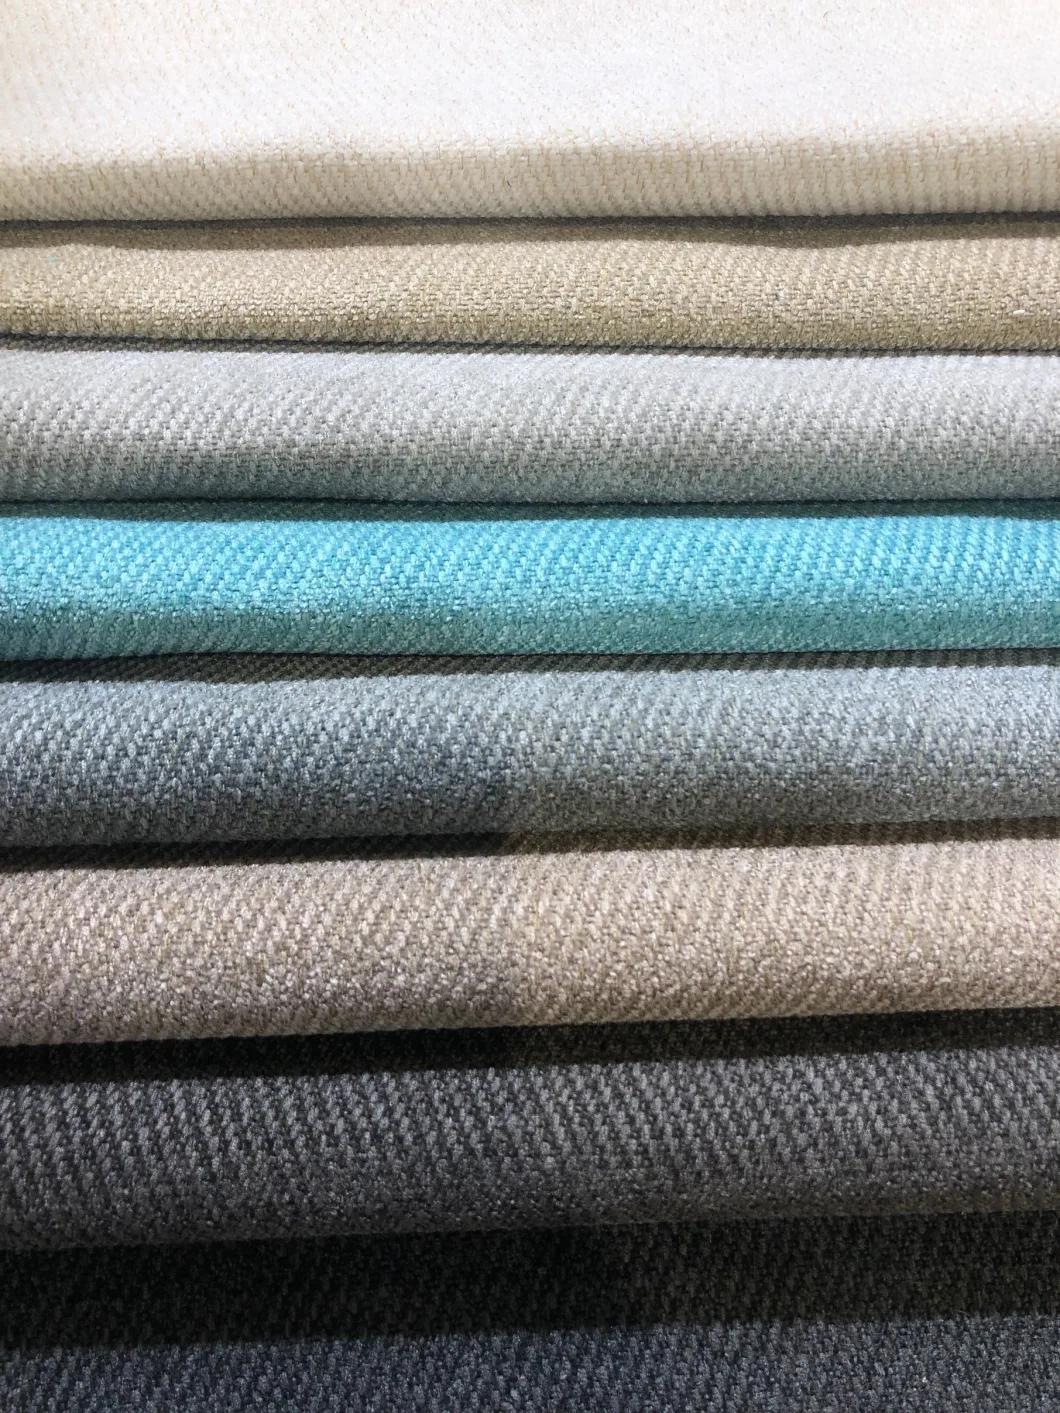 100%Polyester Chenille Fabric for Sofa and Furniture